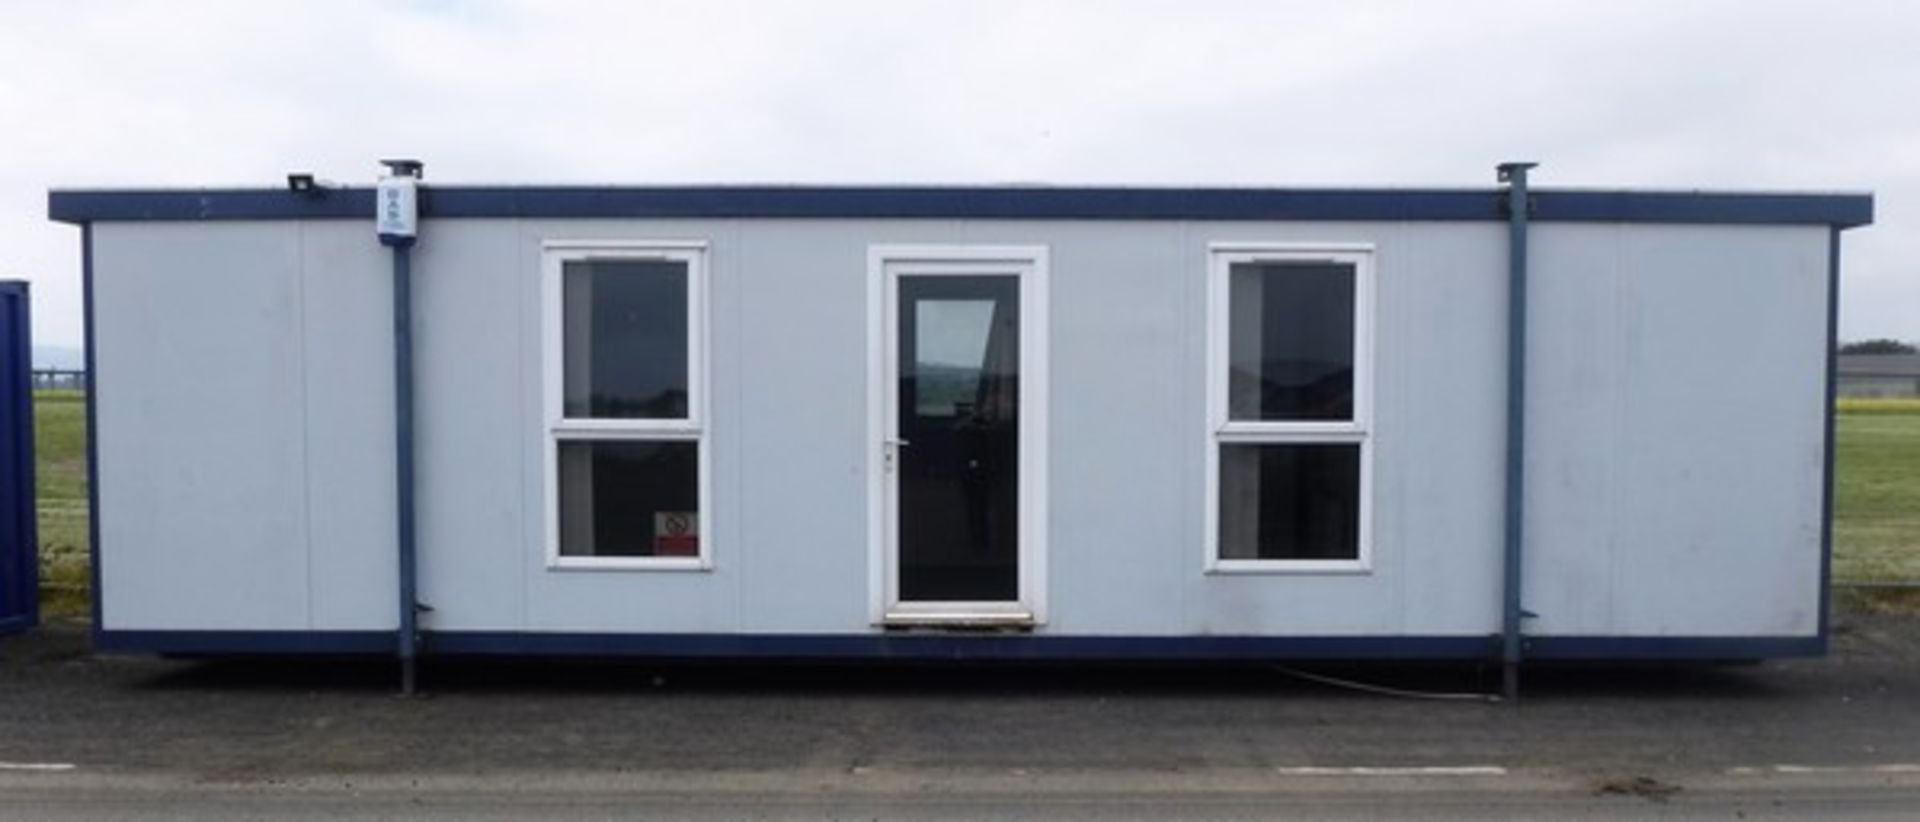 2007 PORTABLE BUILDING. 10m x 3.1m with toilet & kitchen. Double glazed, alarm fitted, insulated. - Image 5 of 12